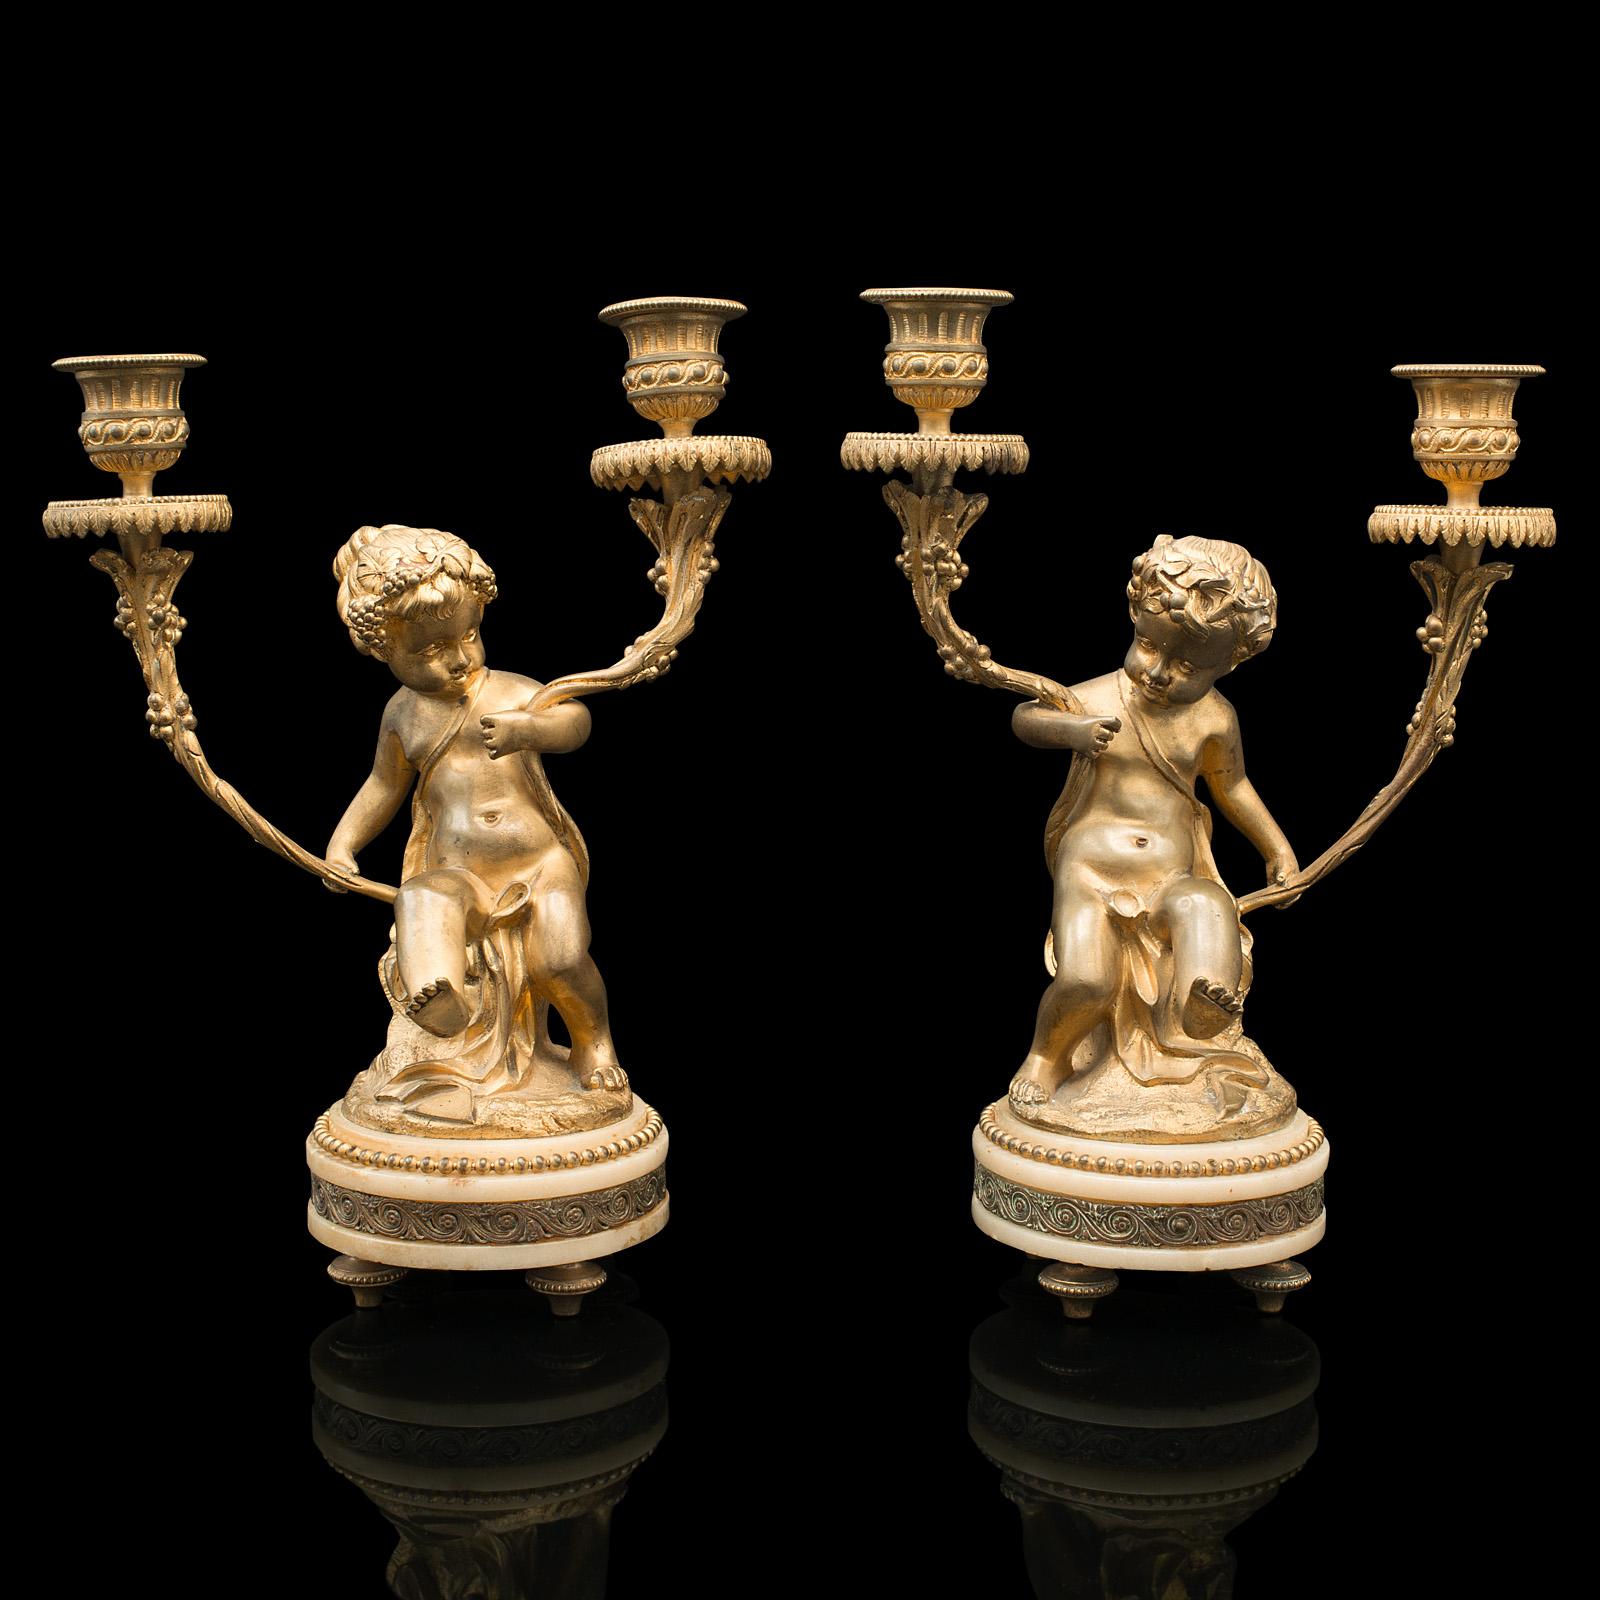 This is a pair of antique cherubic candlesticks. A French, gilt and onyx decorative candle stand, dating to the Victorian period, circa 1880.

A wonderful table-setting pair with striking colour
Displaying a desirable aged patina and in good